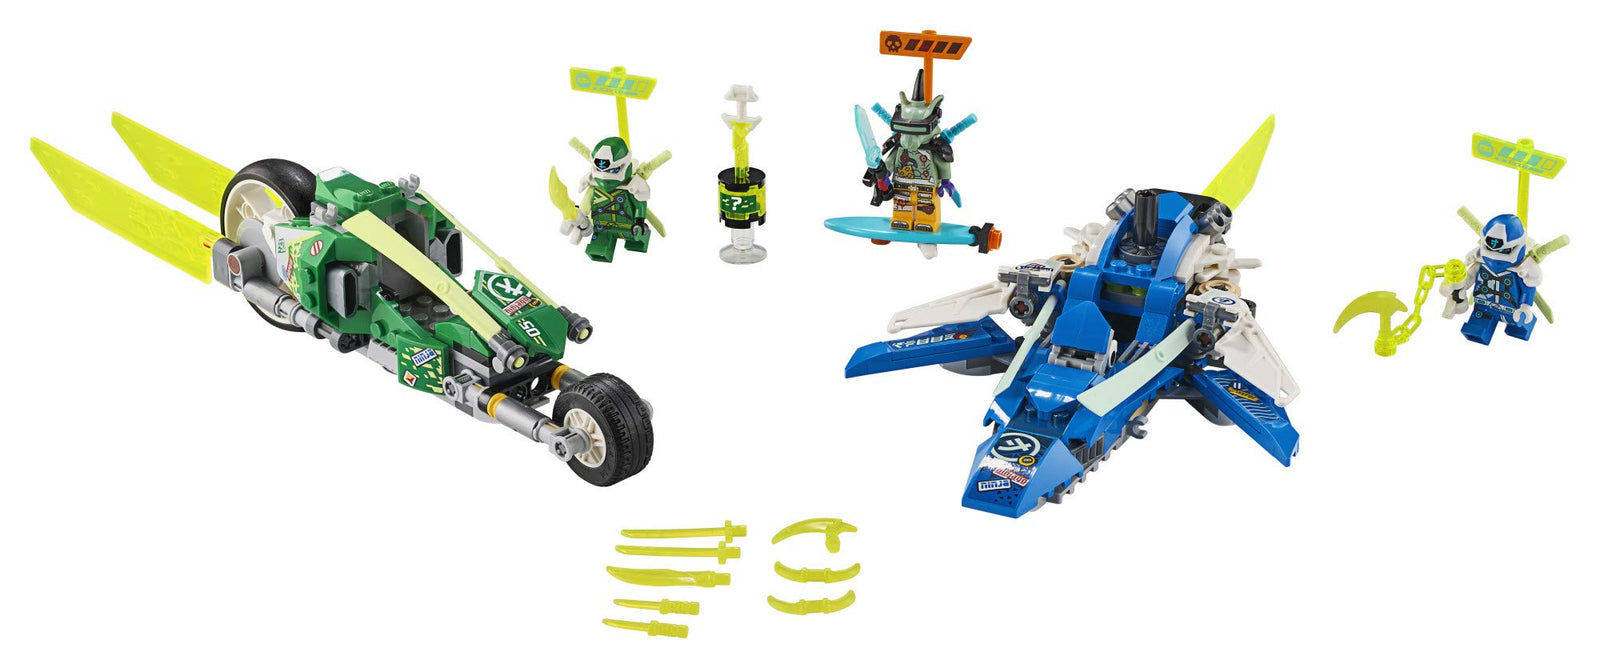 LEGO NINJAGO Jay and Lloyd’s Velocity Racers 71709 Building Kit for Kids and Hot Toys (322 Pieces)